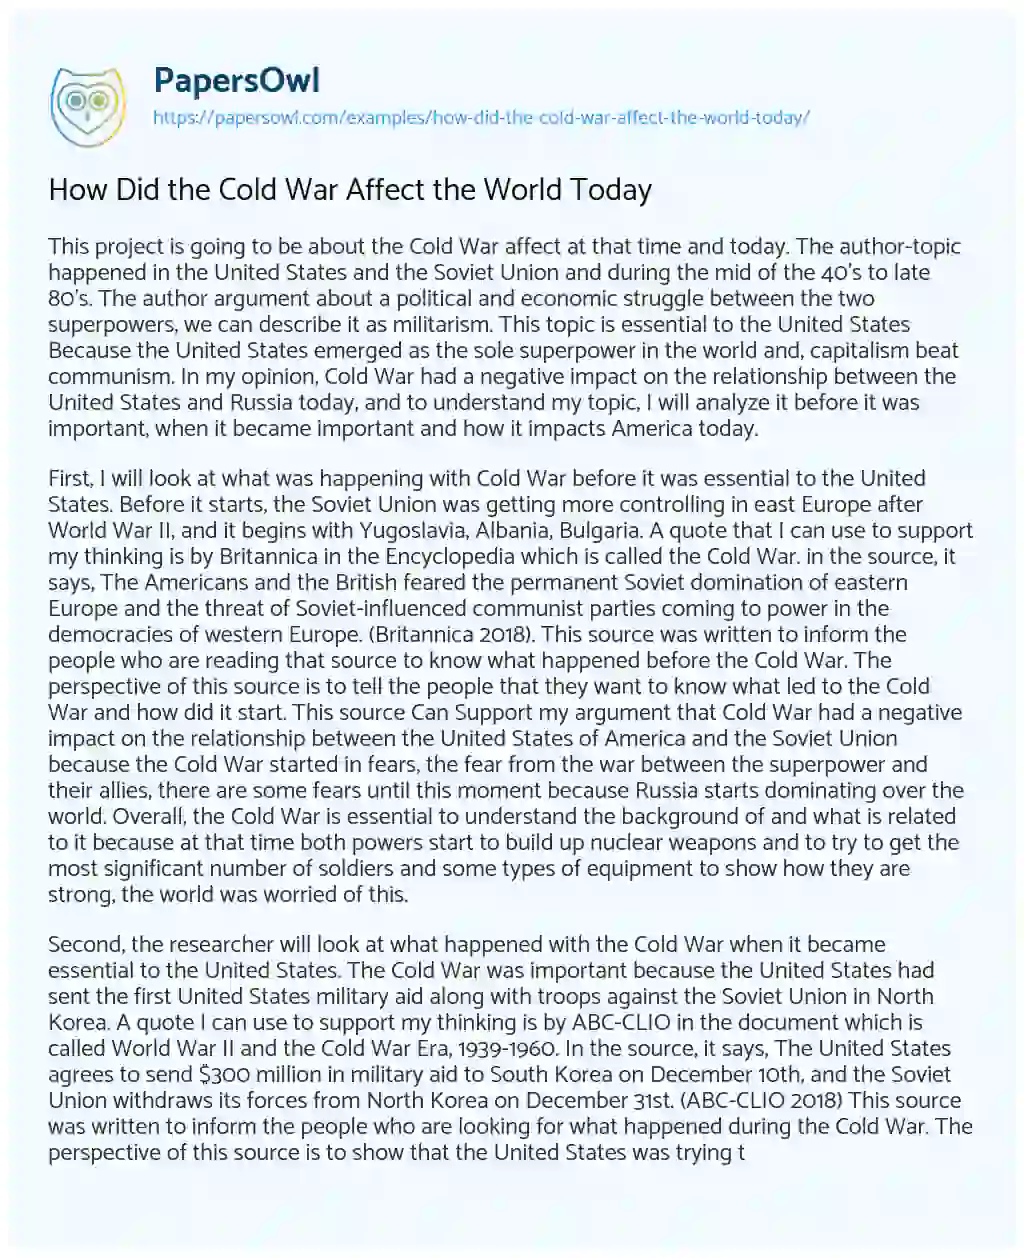 Essay on How did the Cold War Affect the World Today